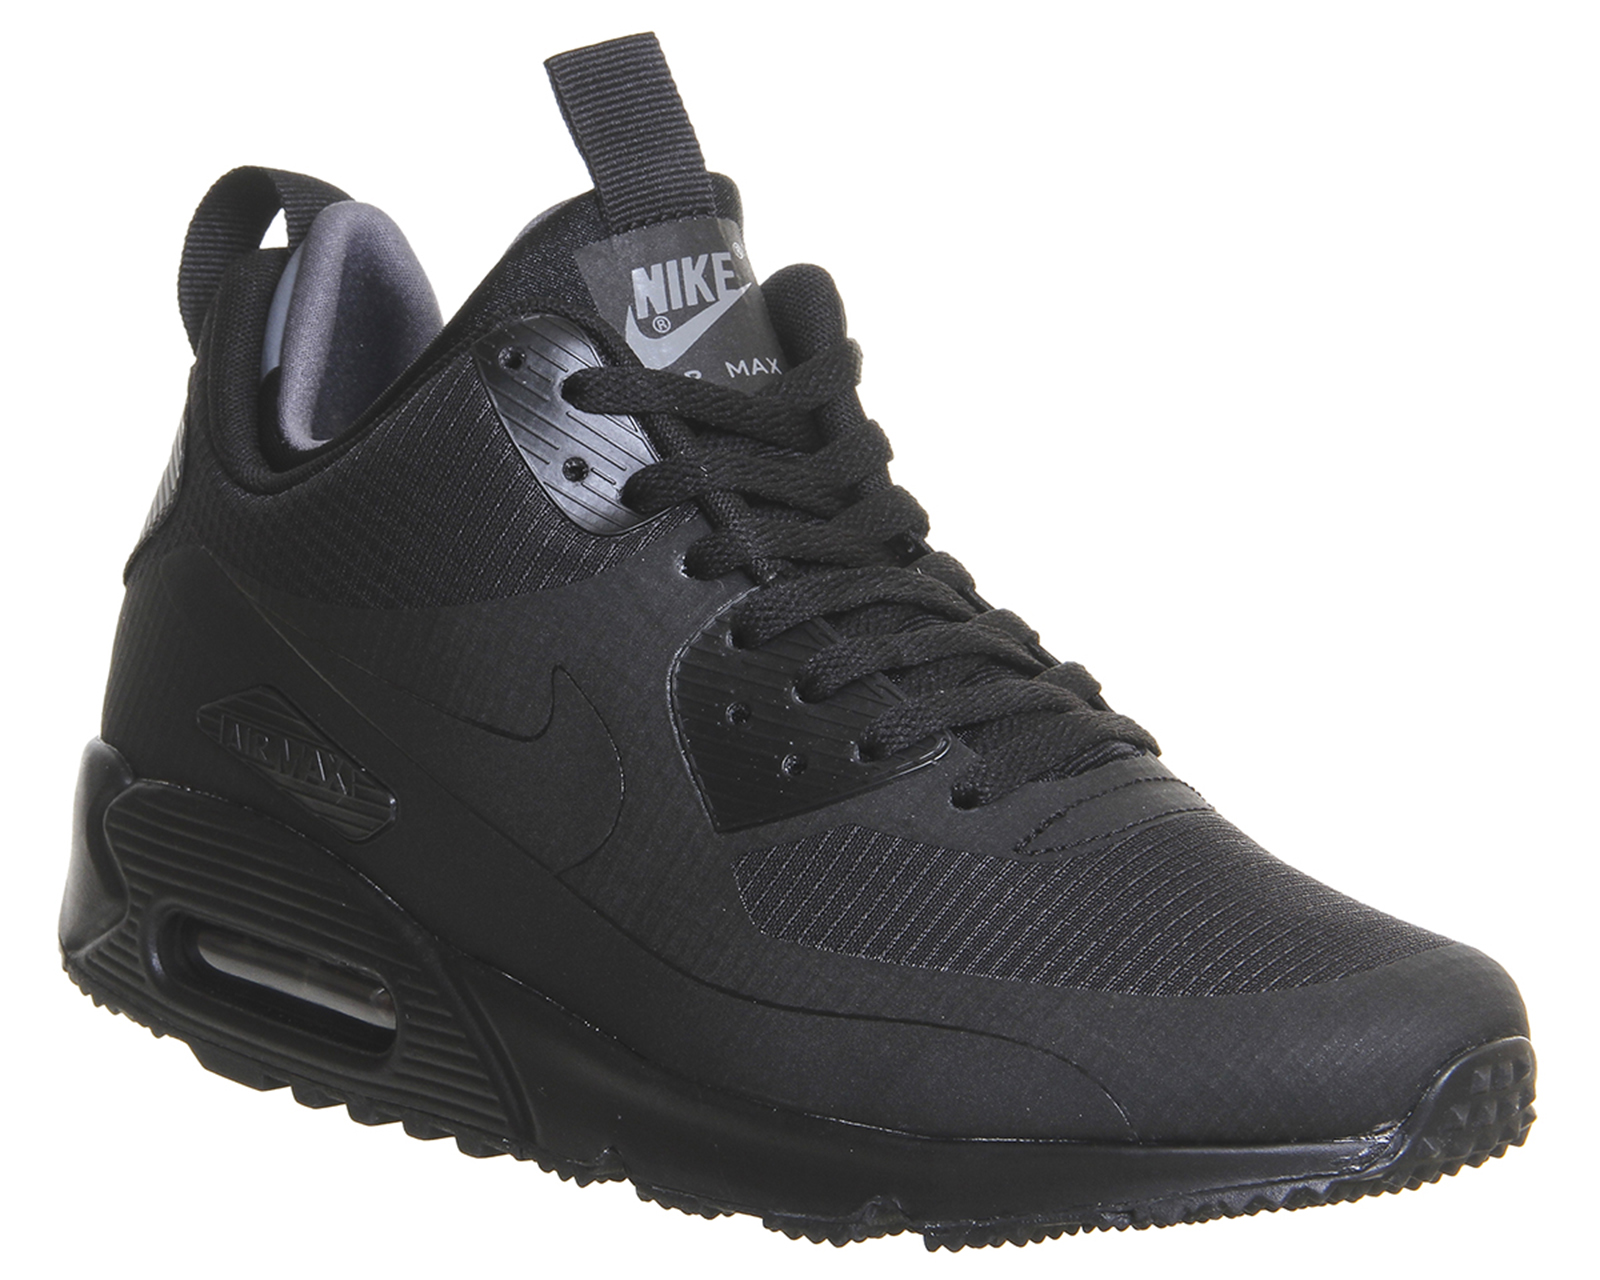 nike+air+max+90+mid+winter+se Promotions